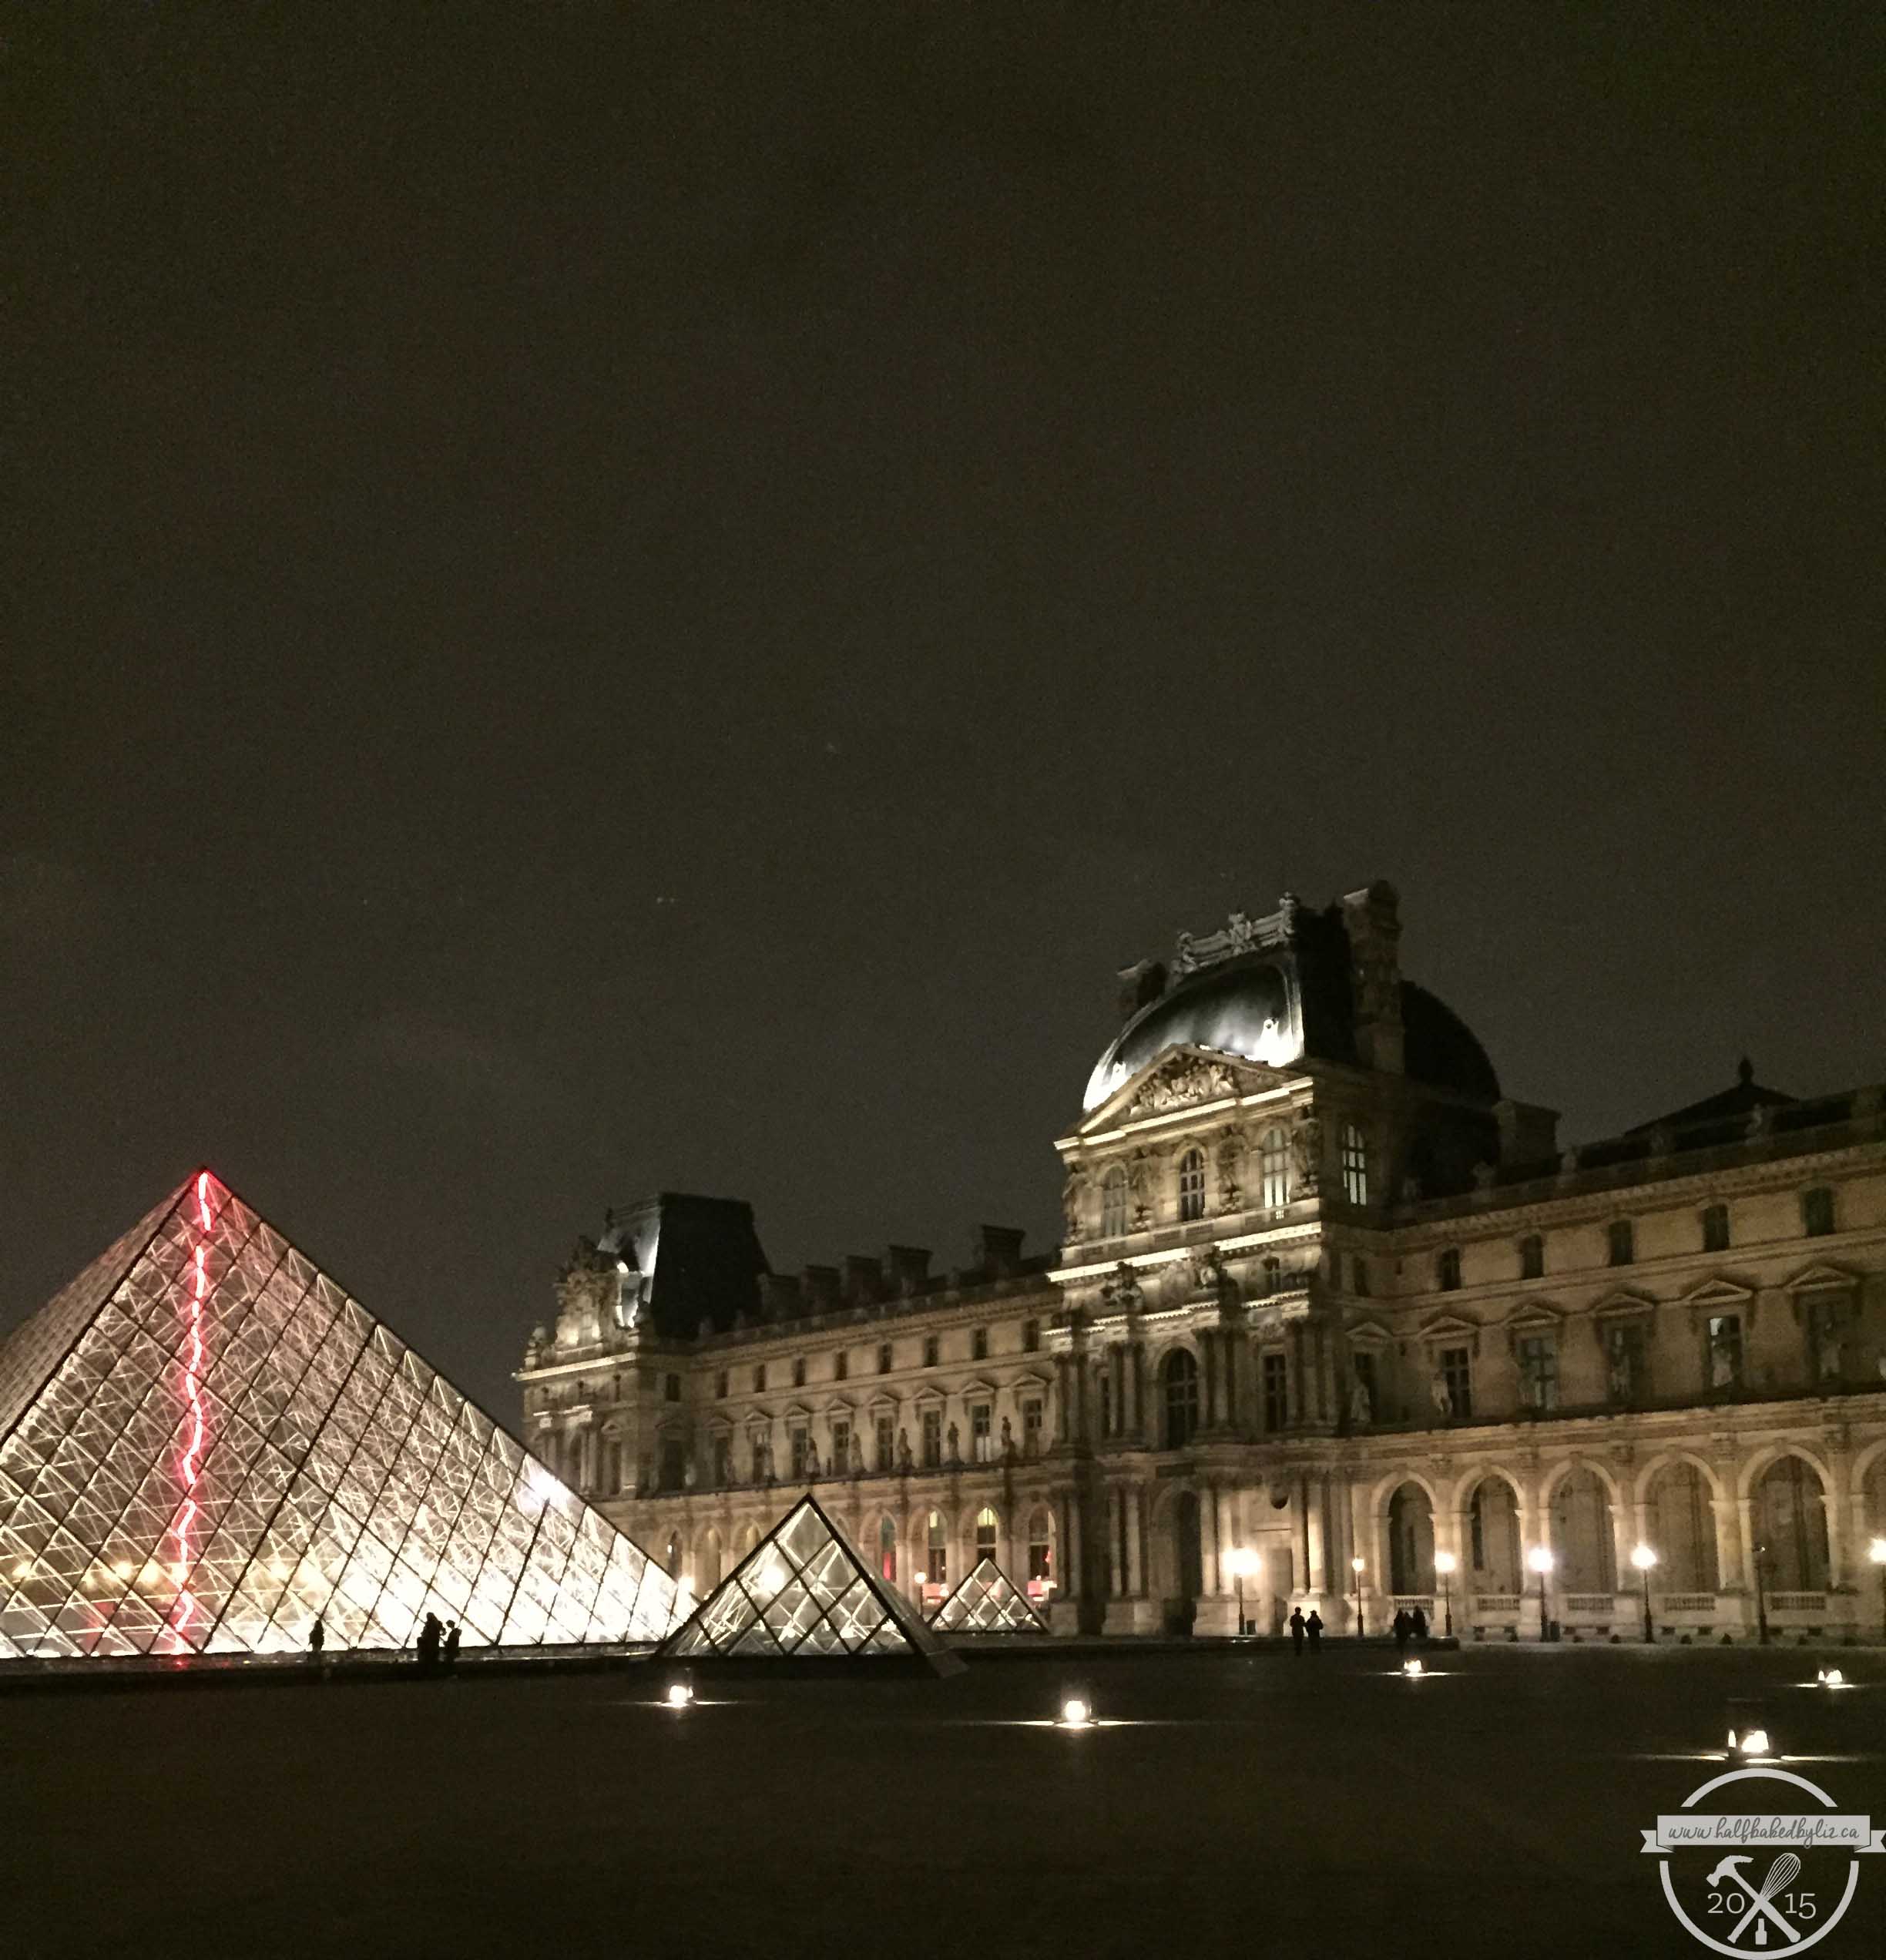 7 - Louvre at Night